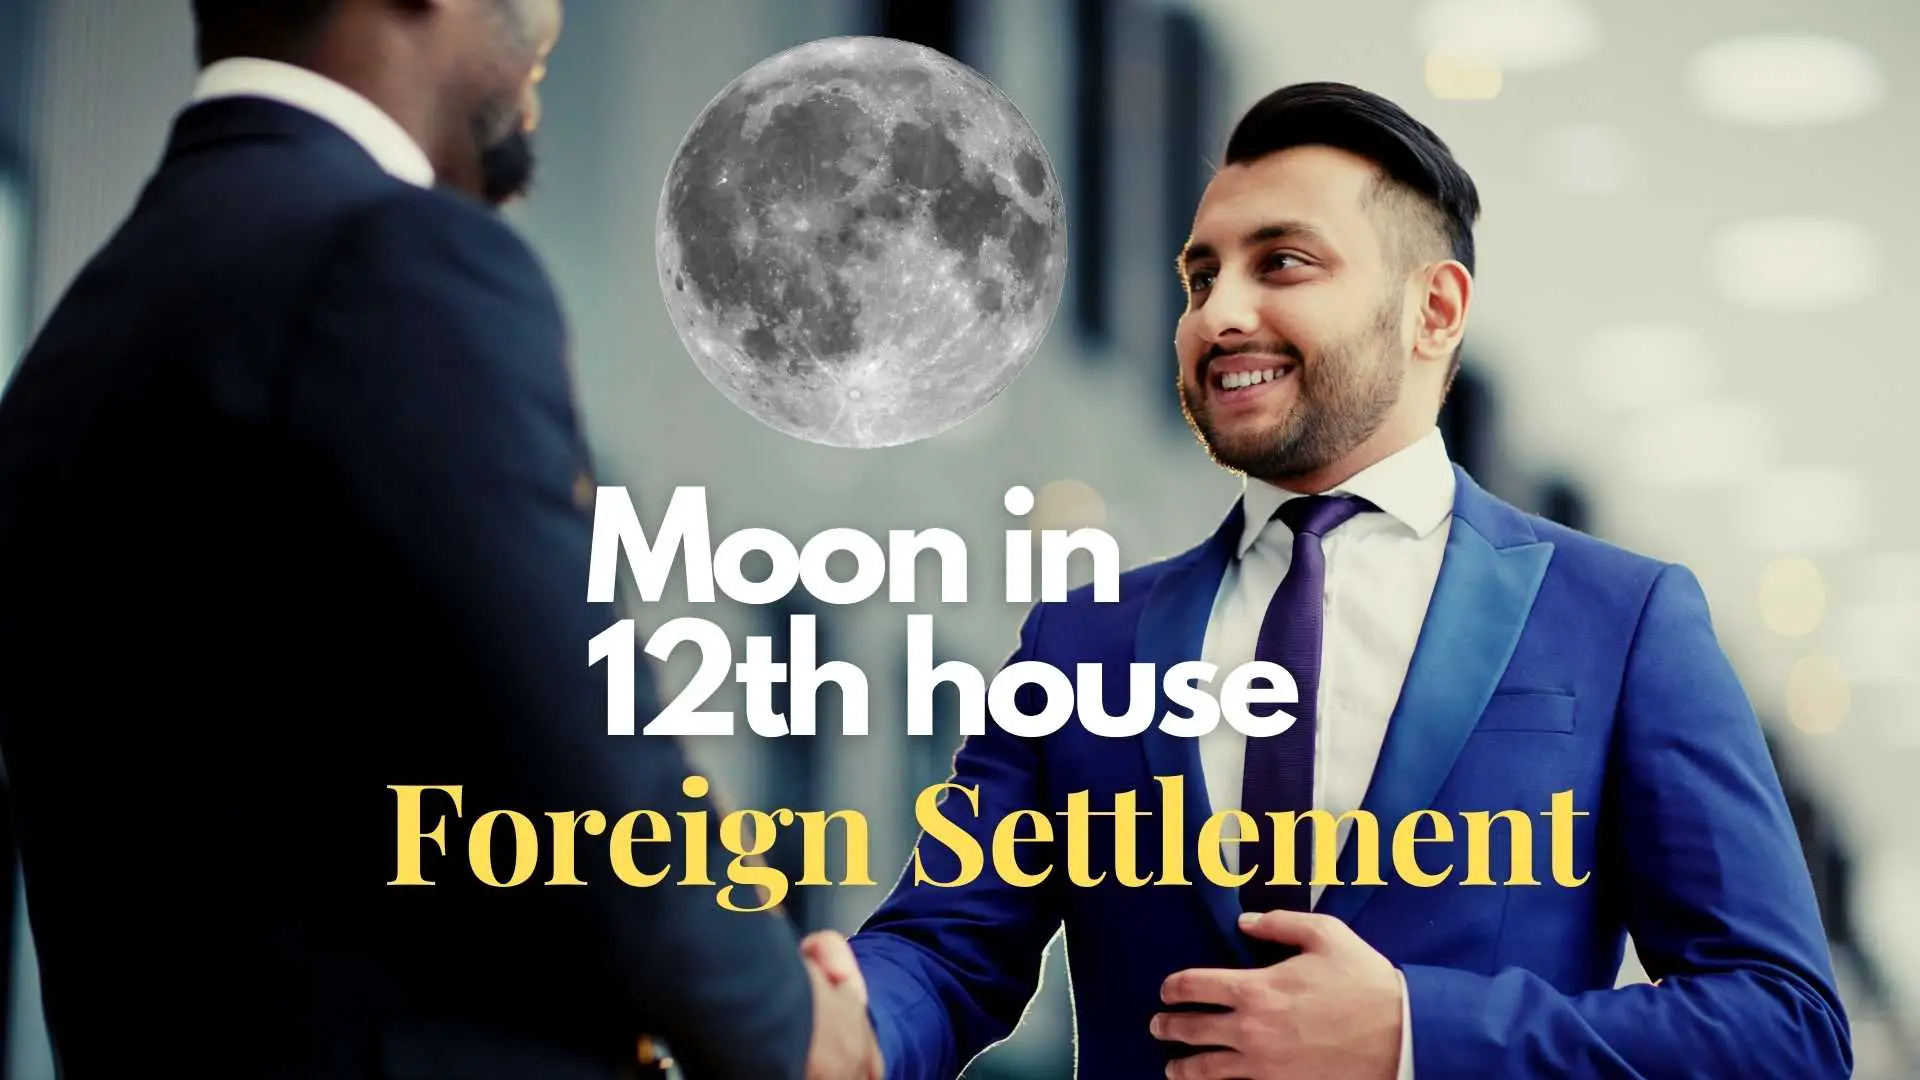 Moon in 12th house Foreign Settlement